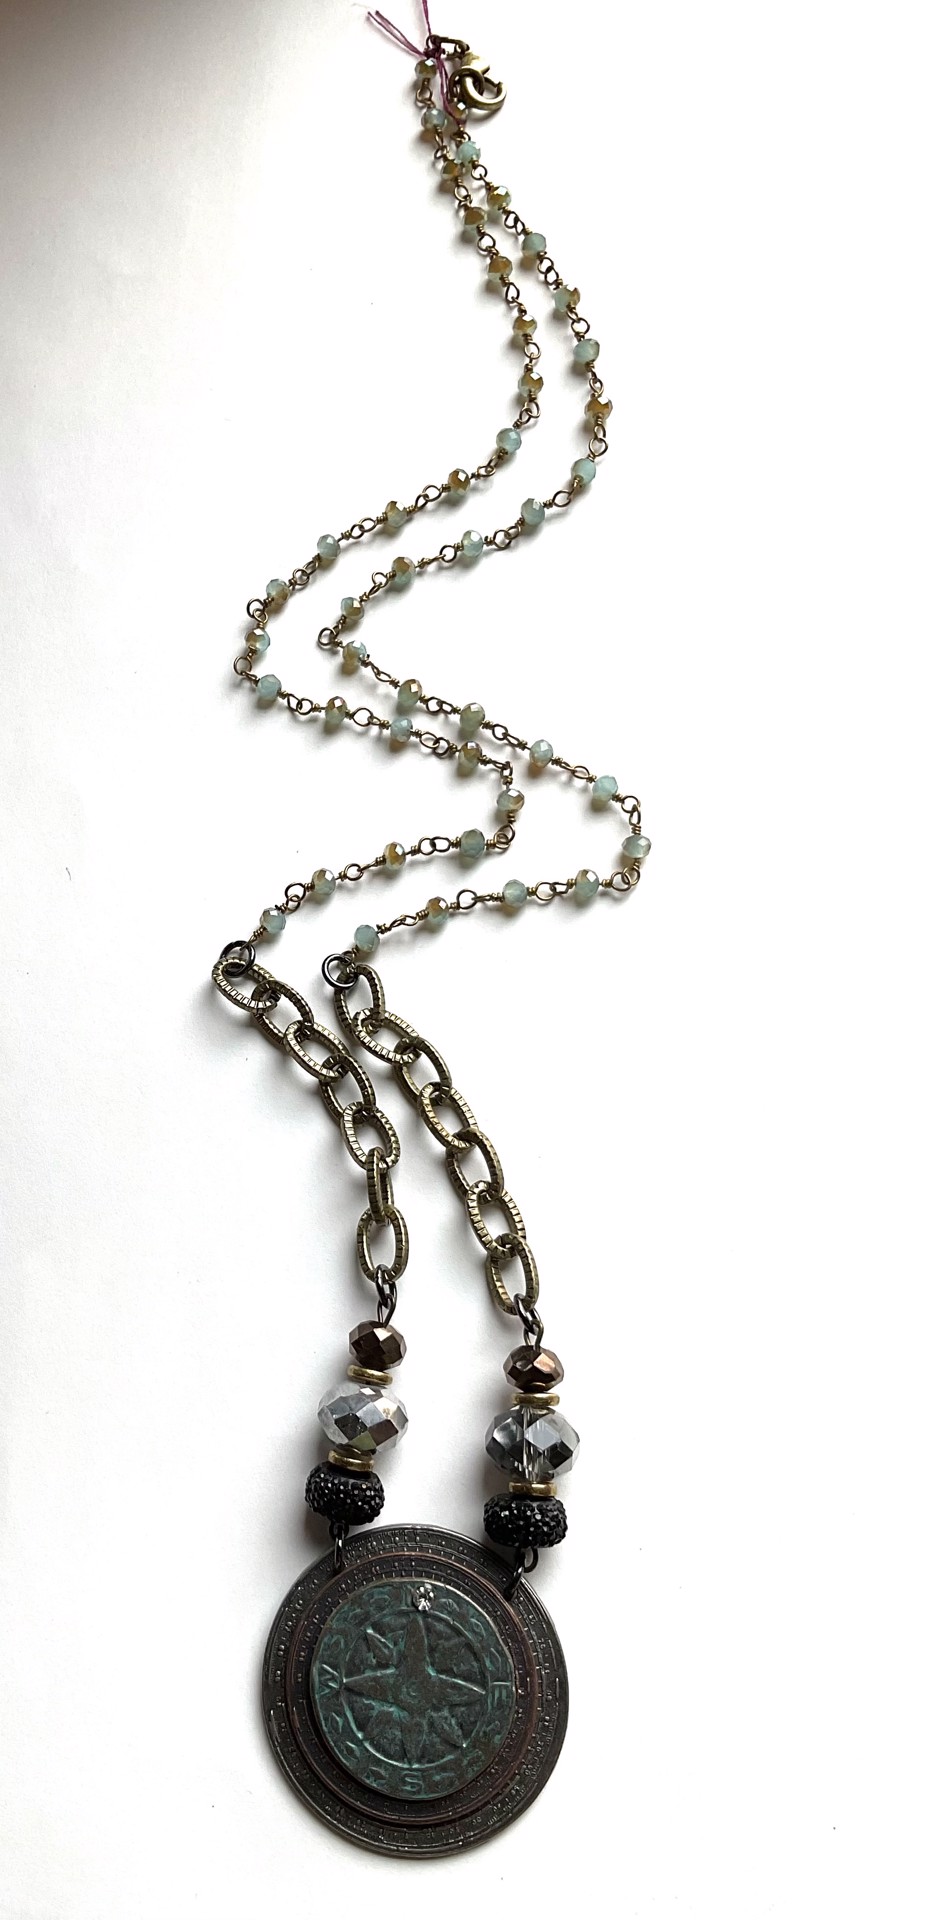 Deluxe Necklace by Lannie Cunningham Jewelry | ArtCloud